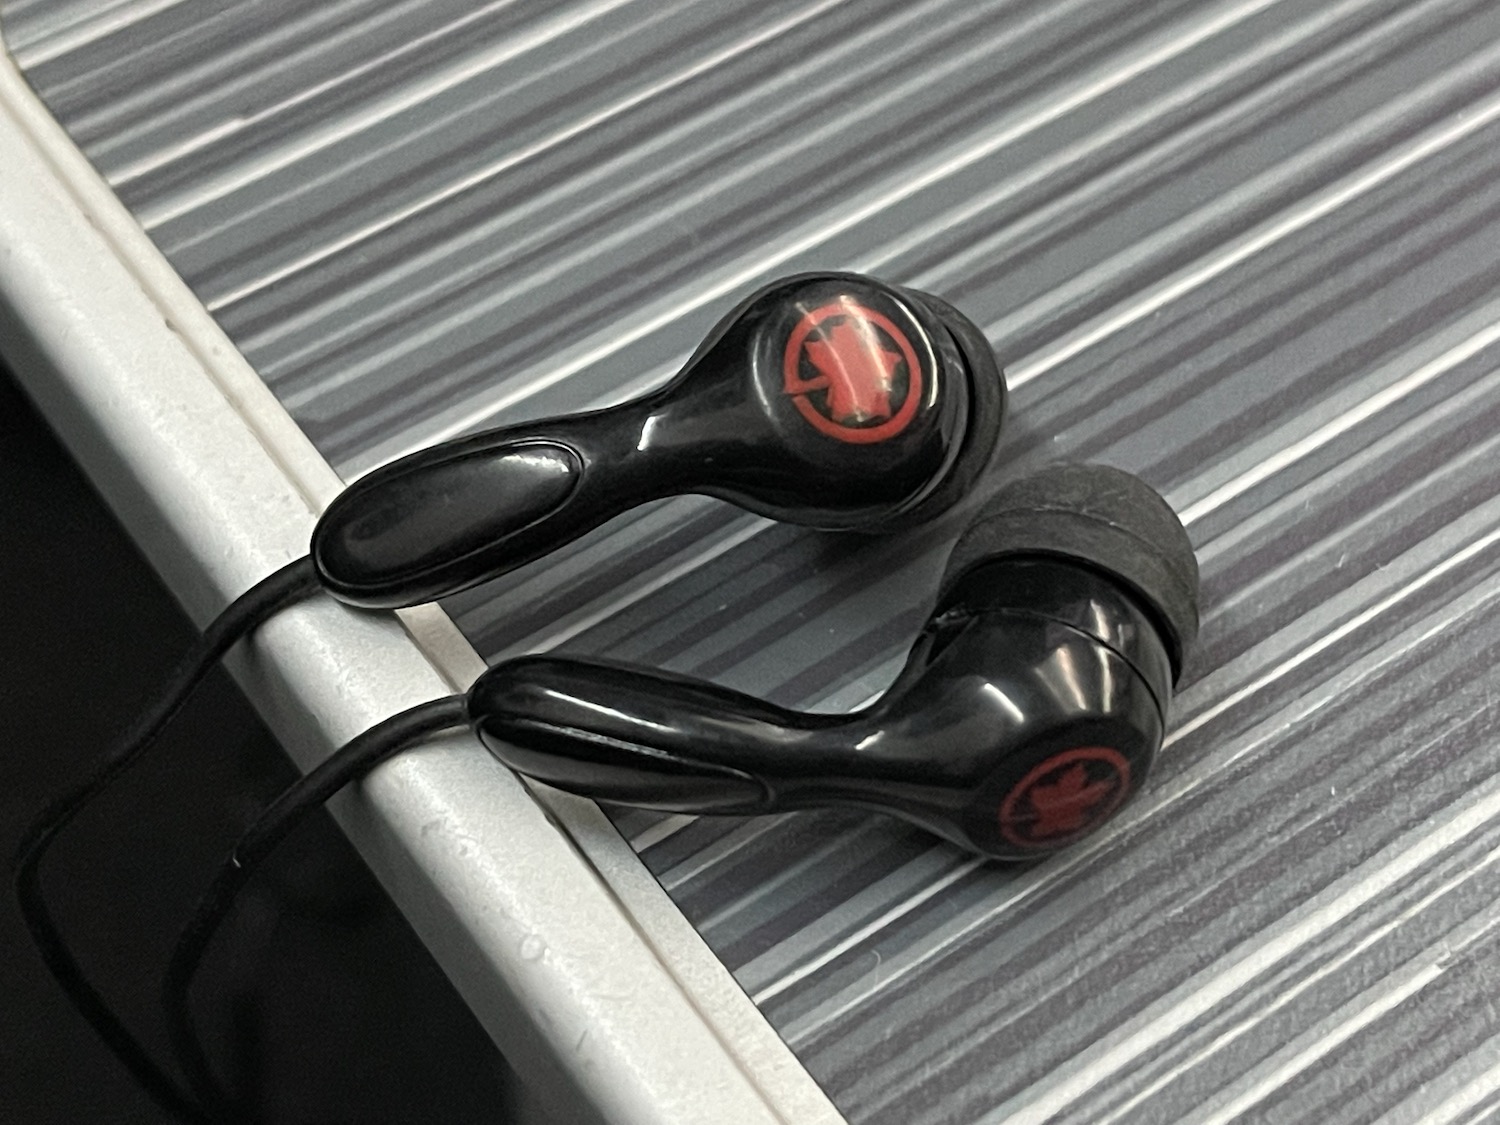 a pair of black earbuds